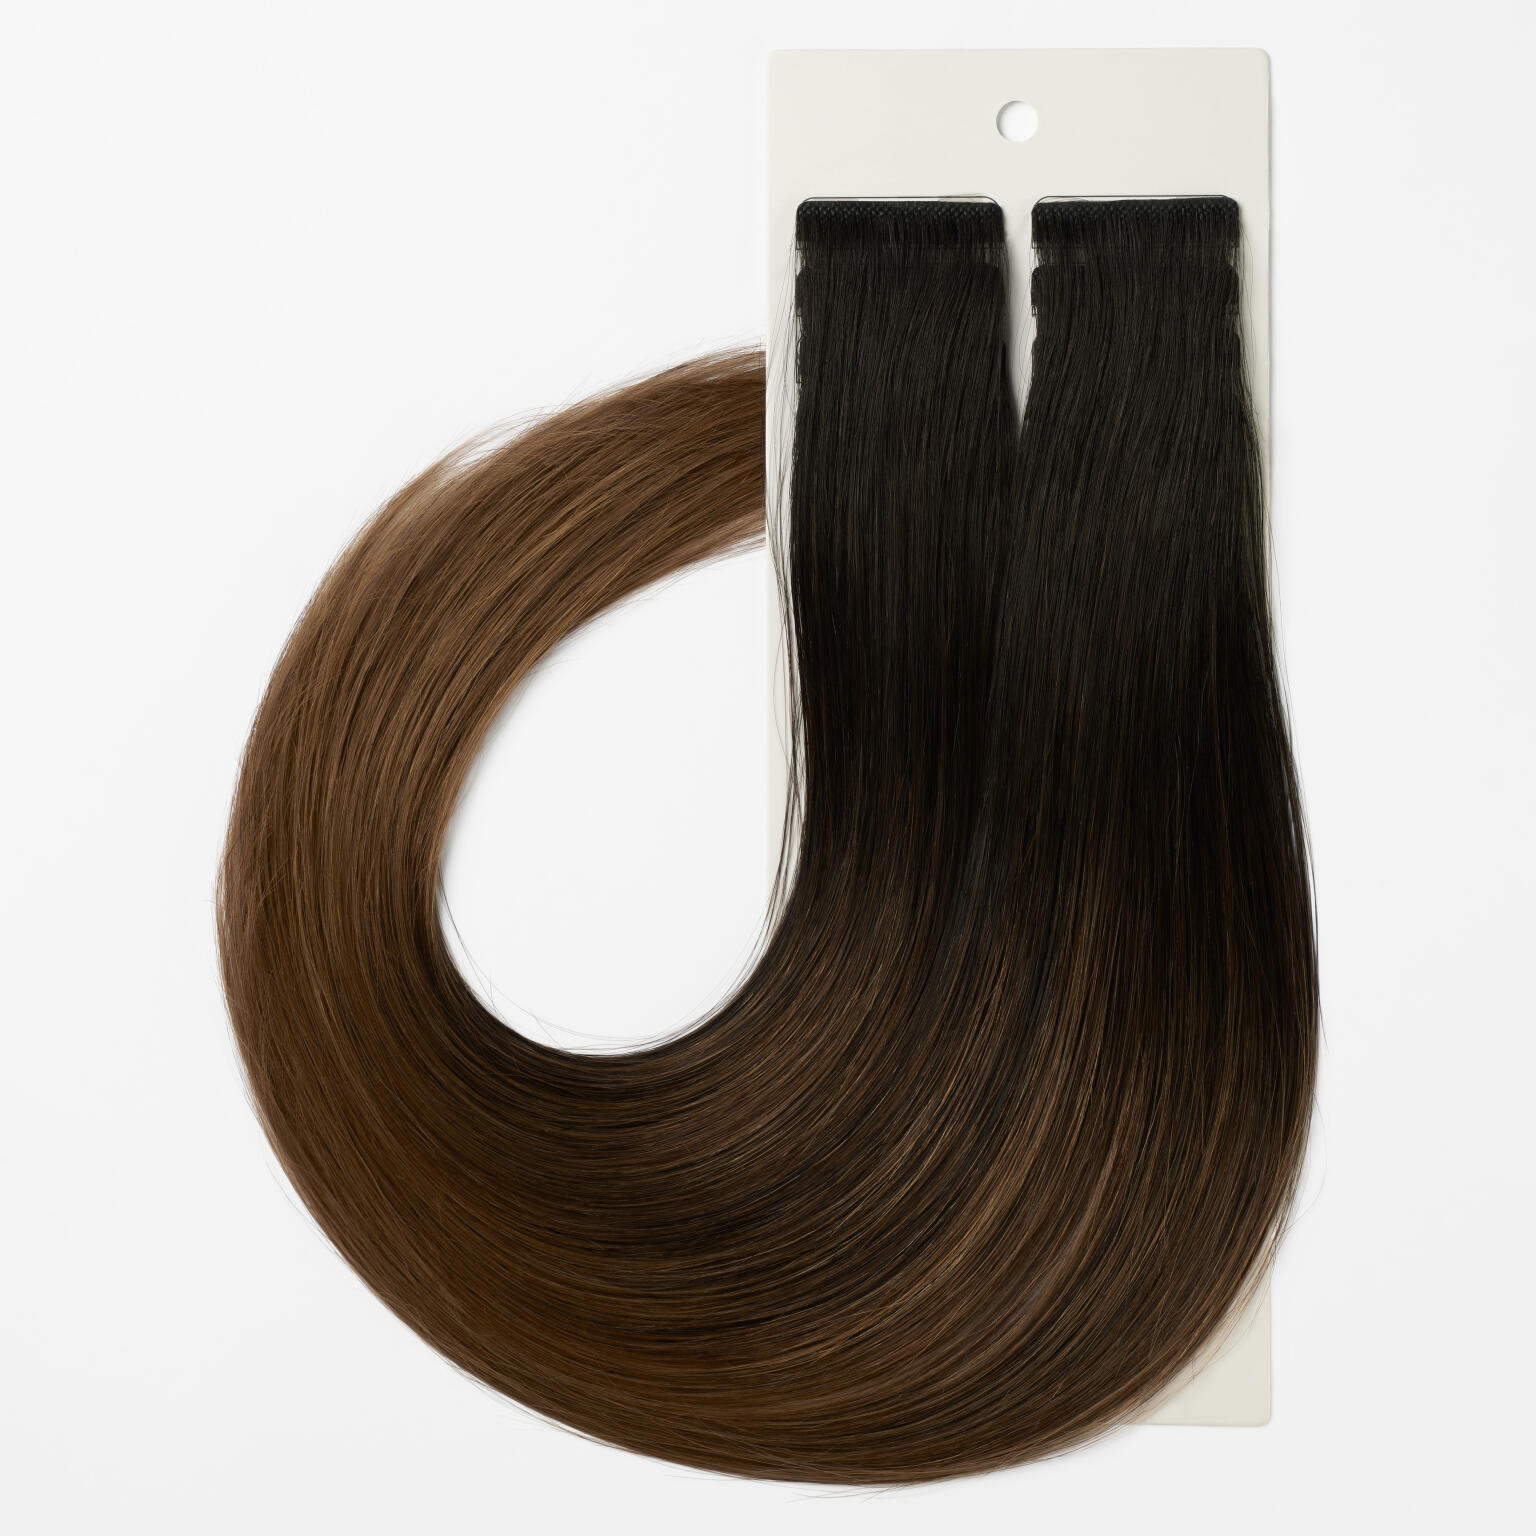 Luxe Tape Extensions Seamless 4 CM3.0/7.0 40 cm